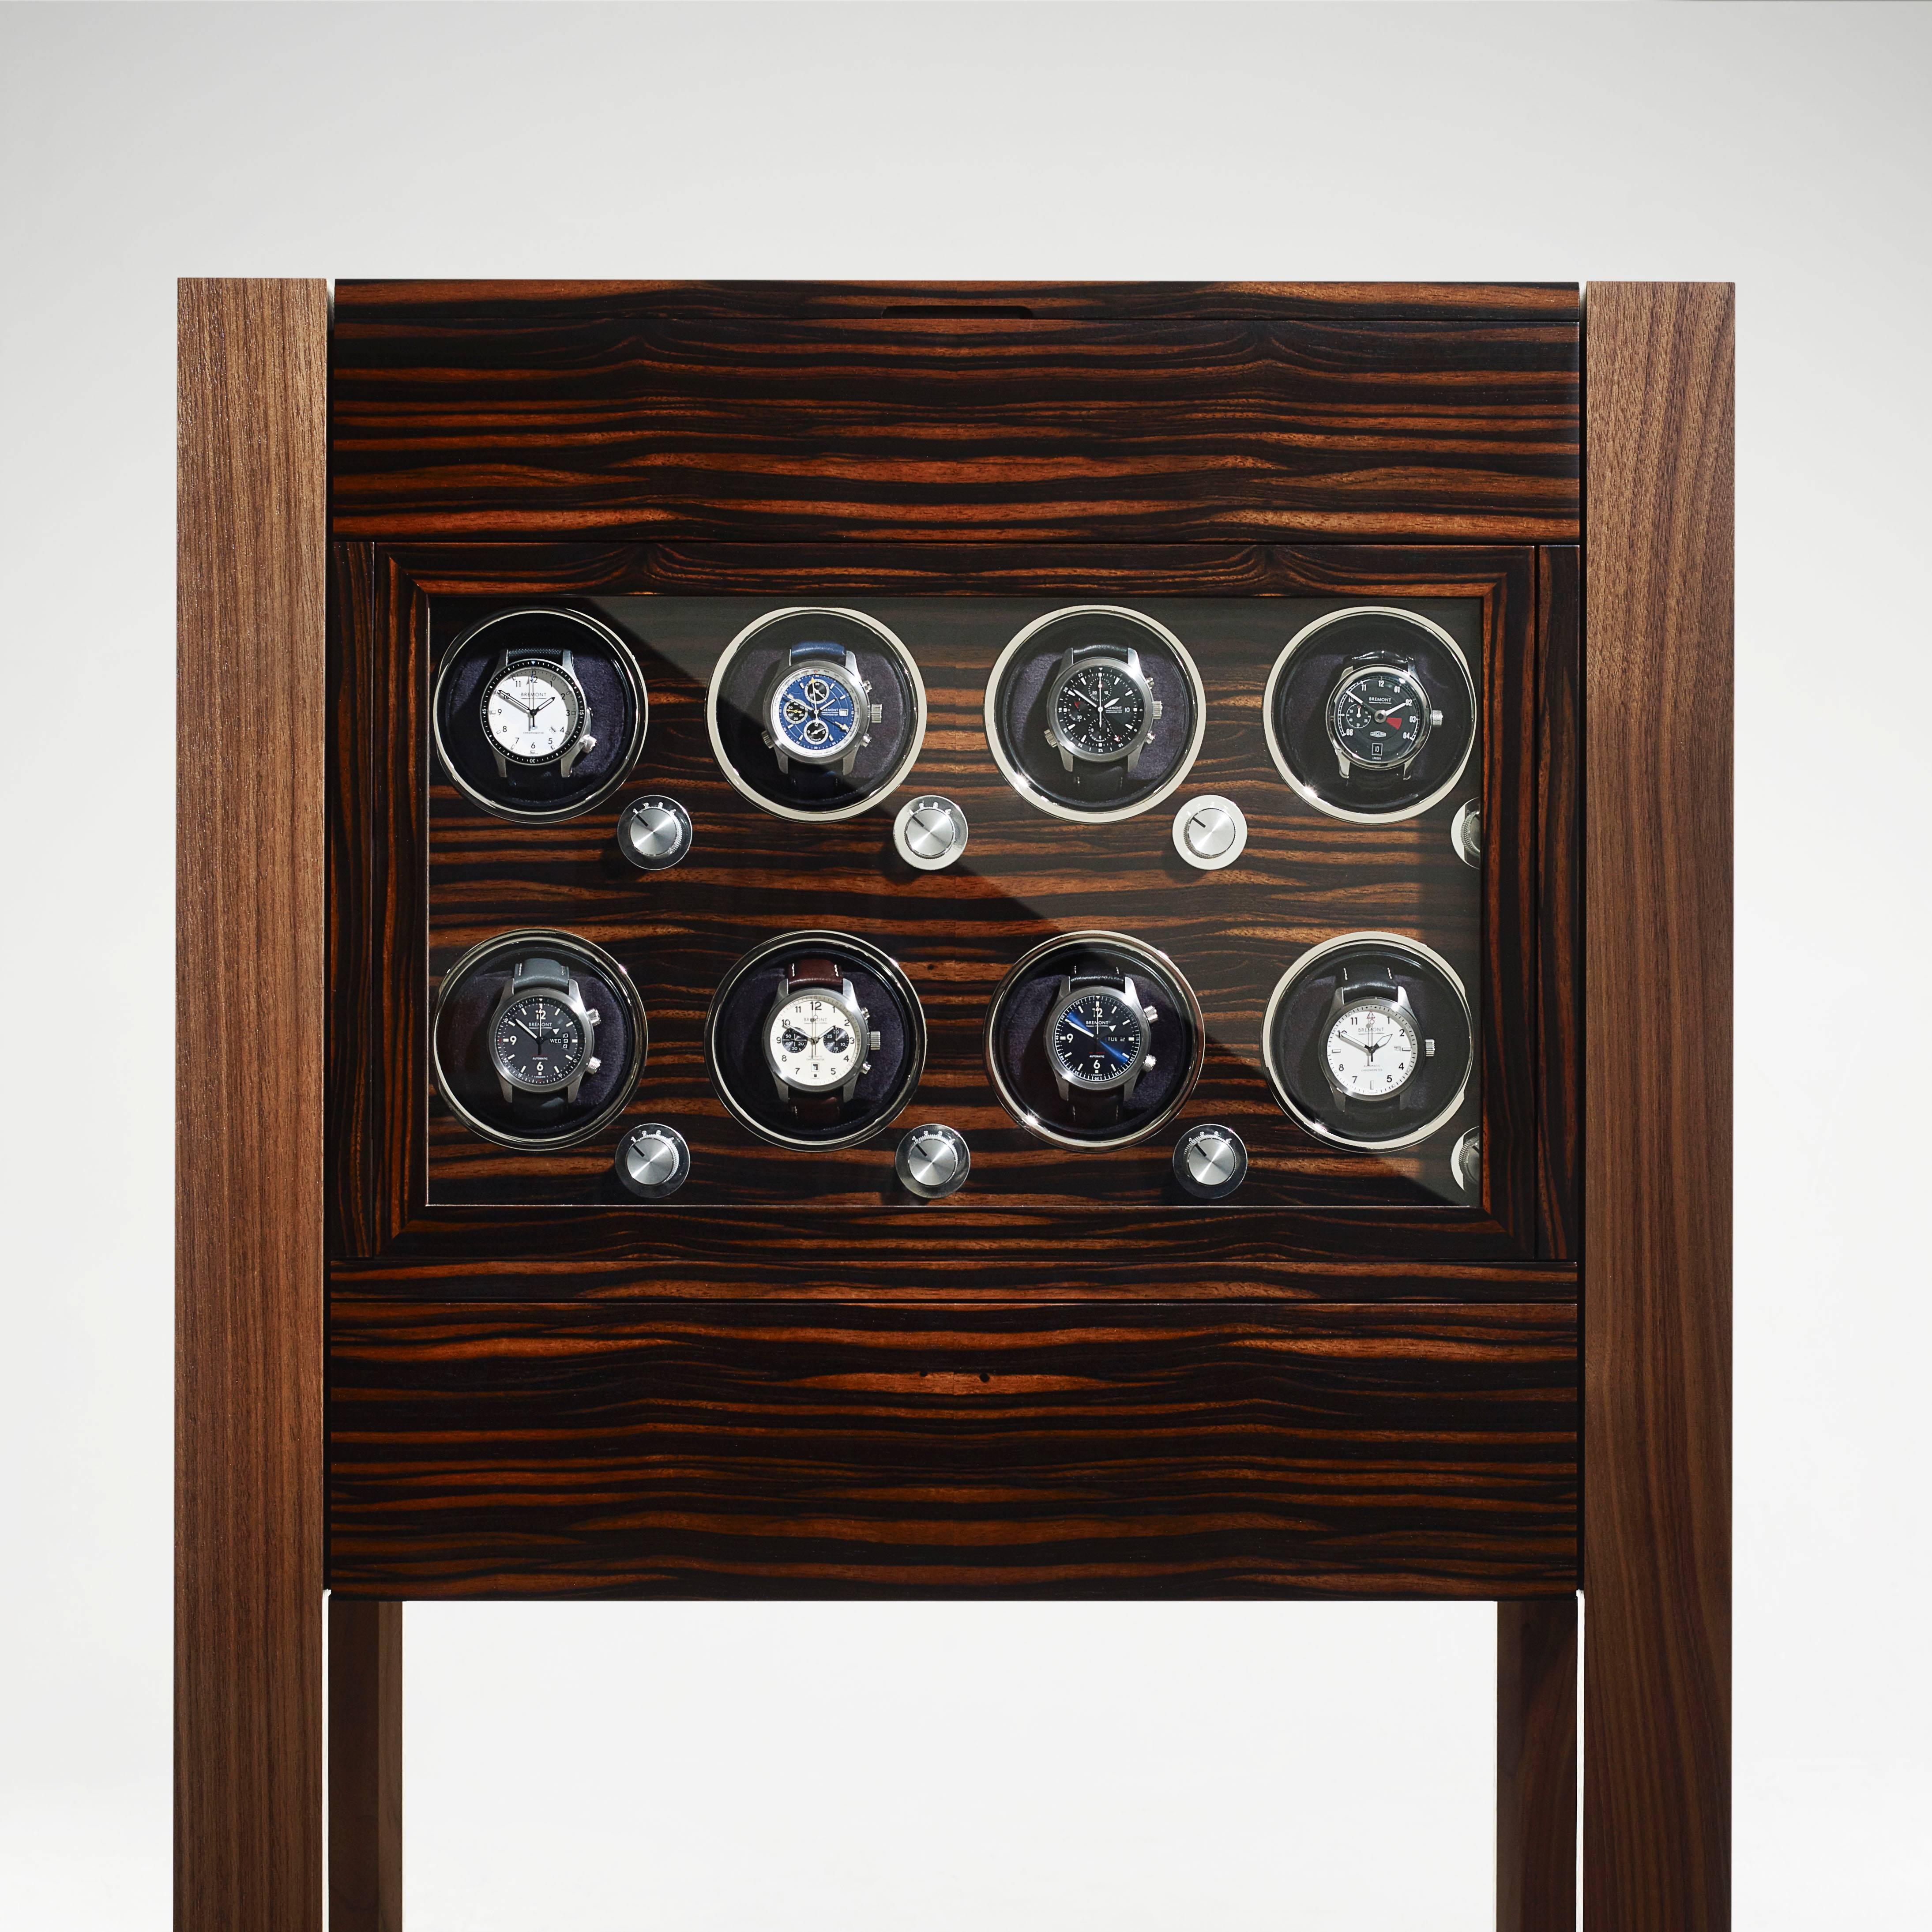 Handcrafted in marble Macassar ebony and walnut with a ripple walnut interior. Eight watch winders for keeping automatic watches ticking are displayed behind a hinged glass door at the front of the cabinet, with leather lined compartments, padded